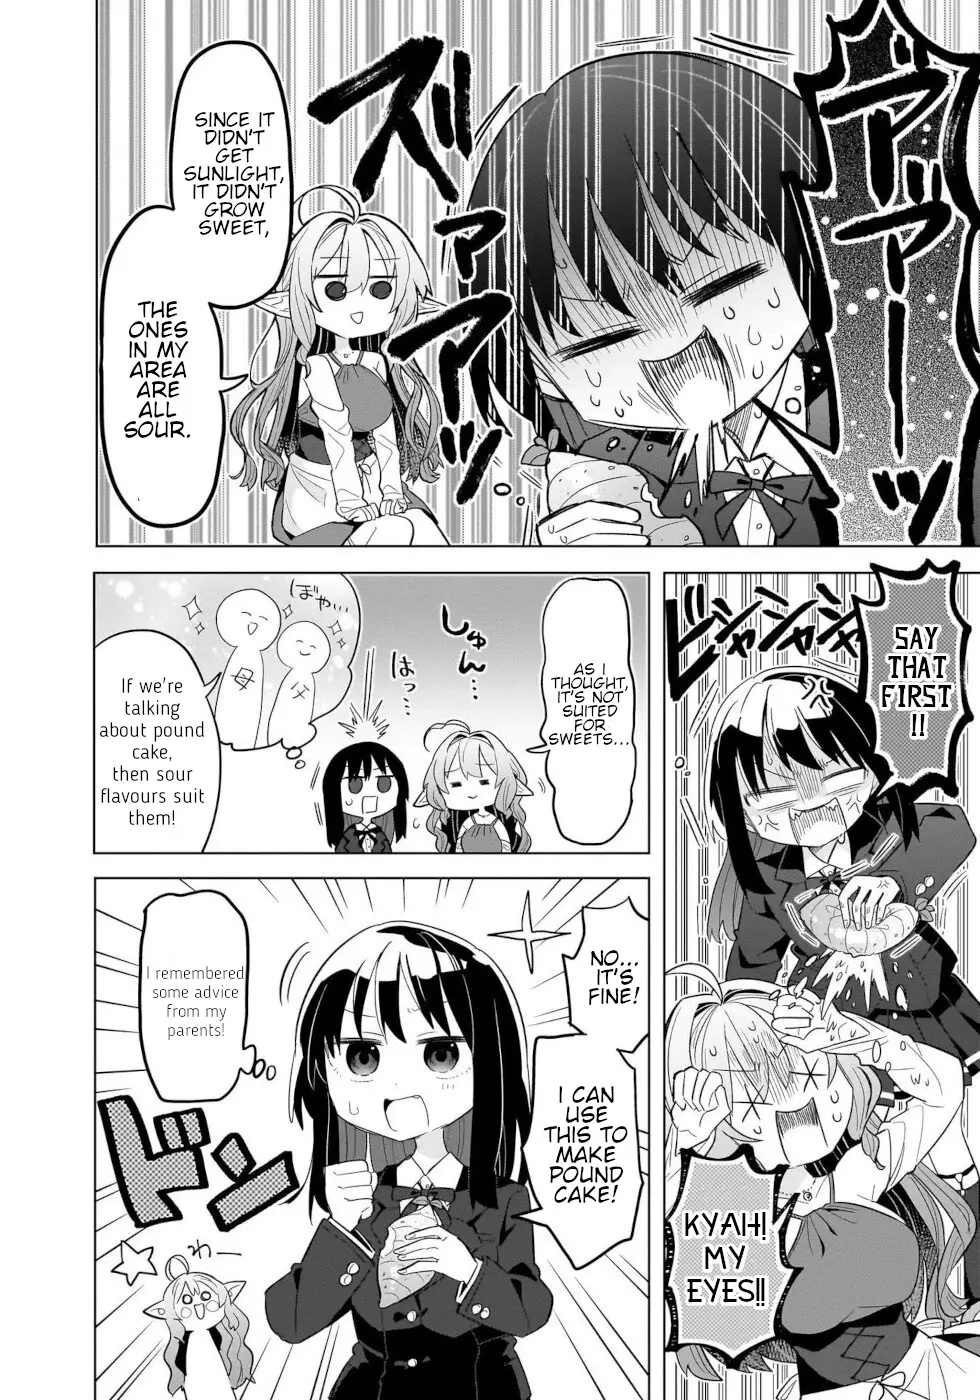 Sweets, Elf, And A High School Girl - 2 page 8-f9568b40